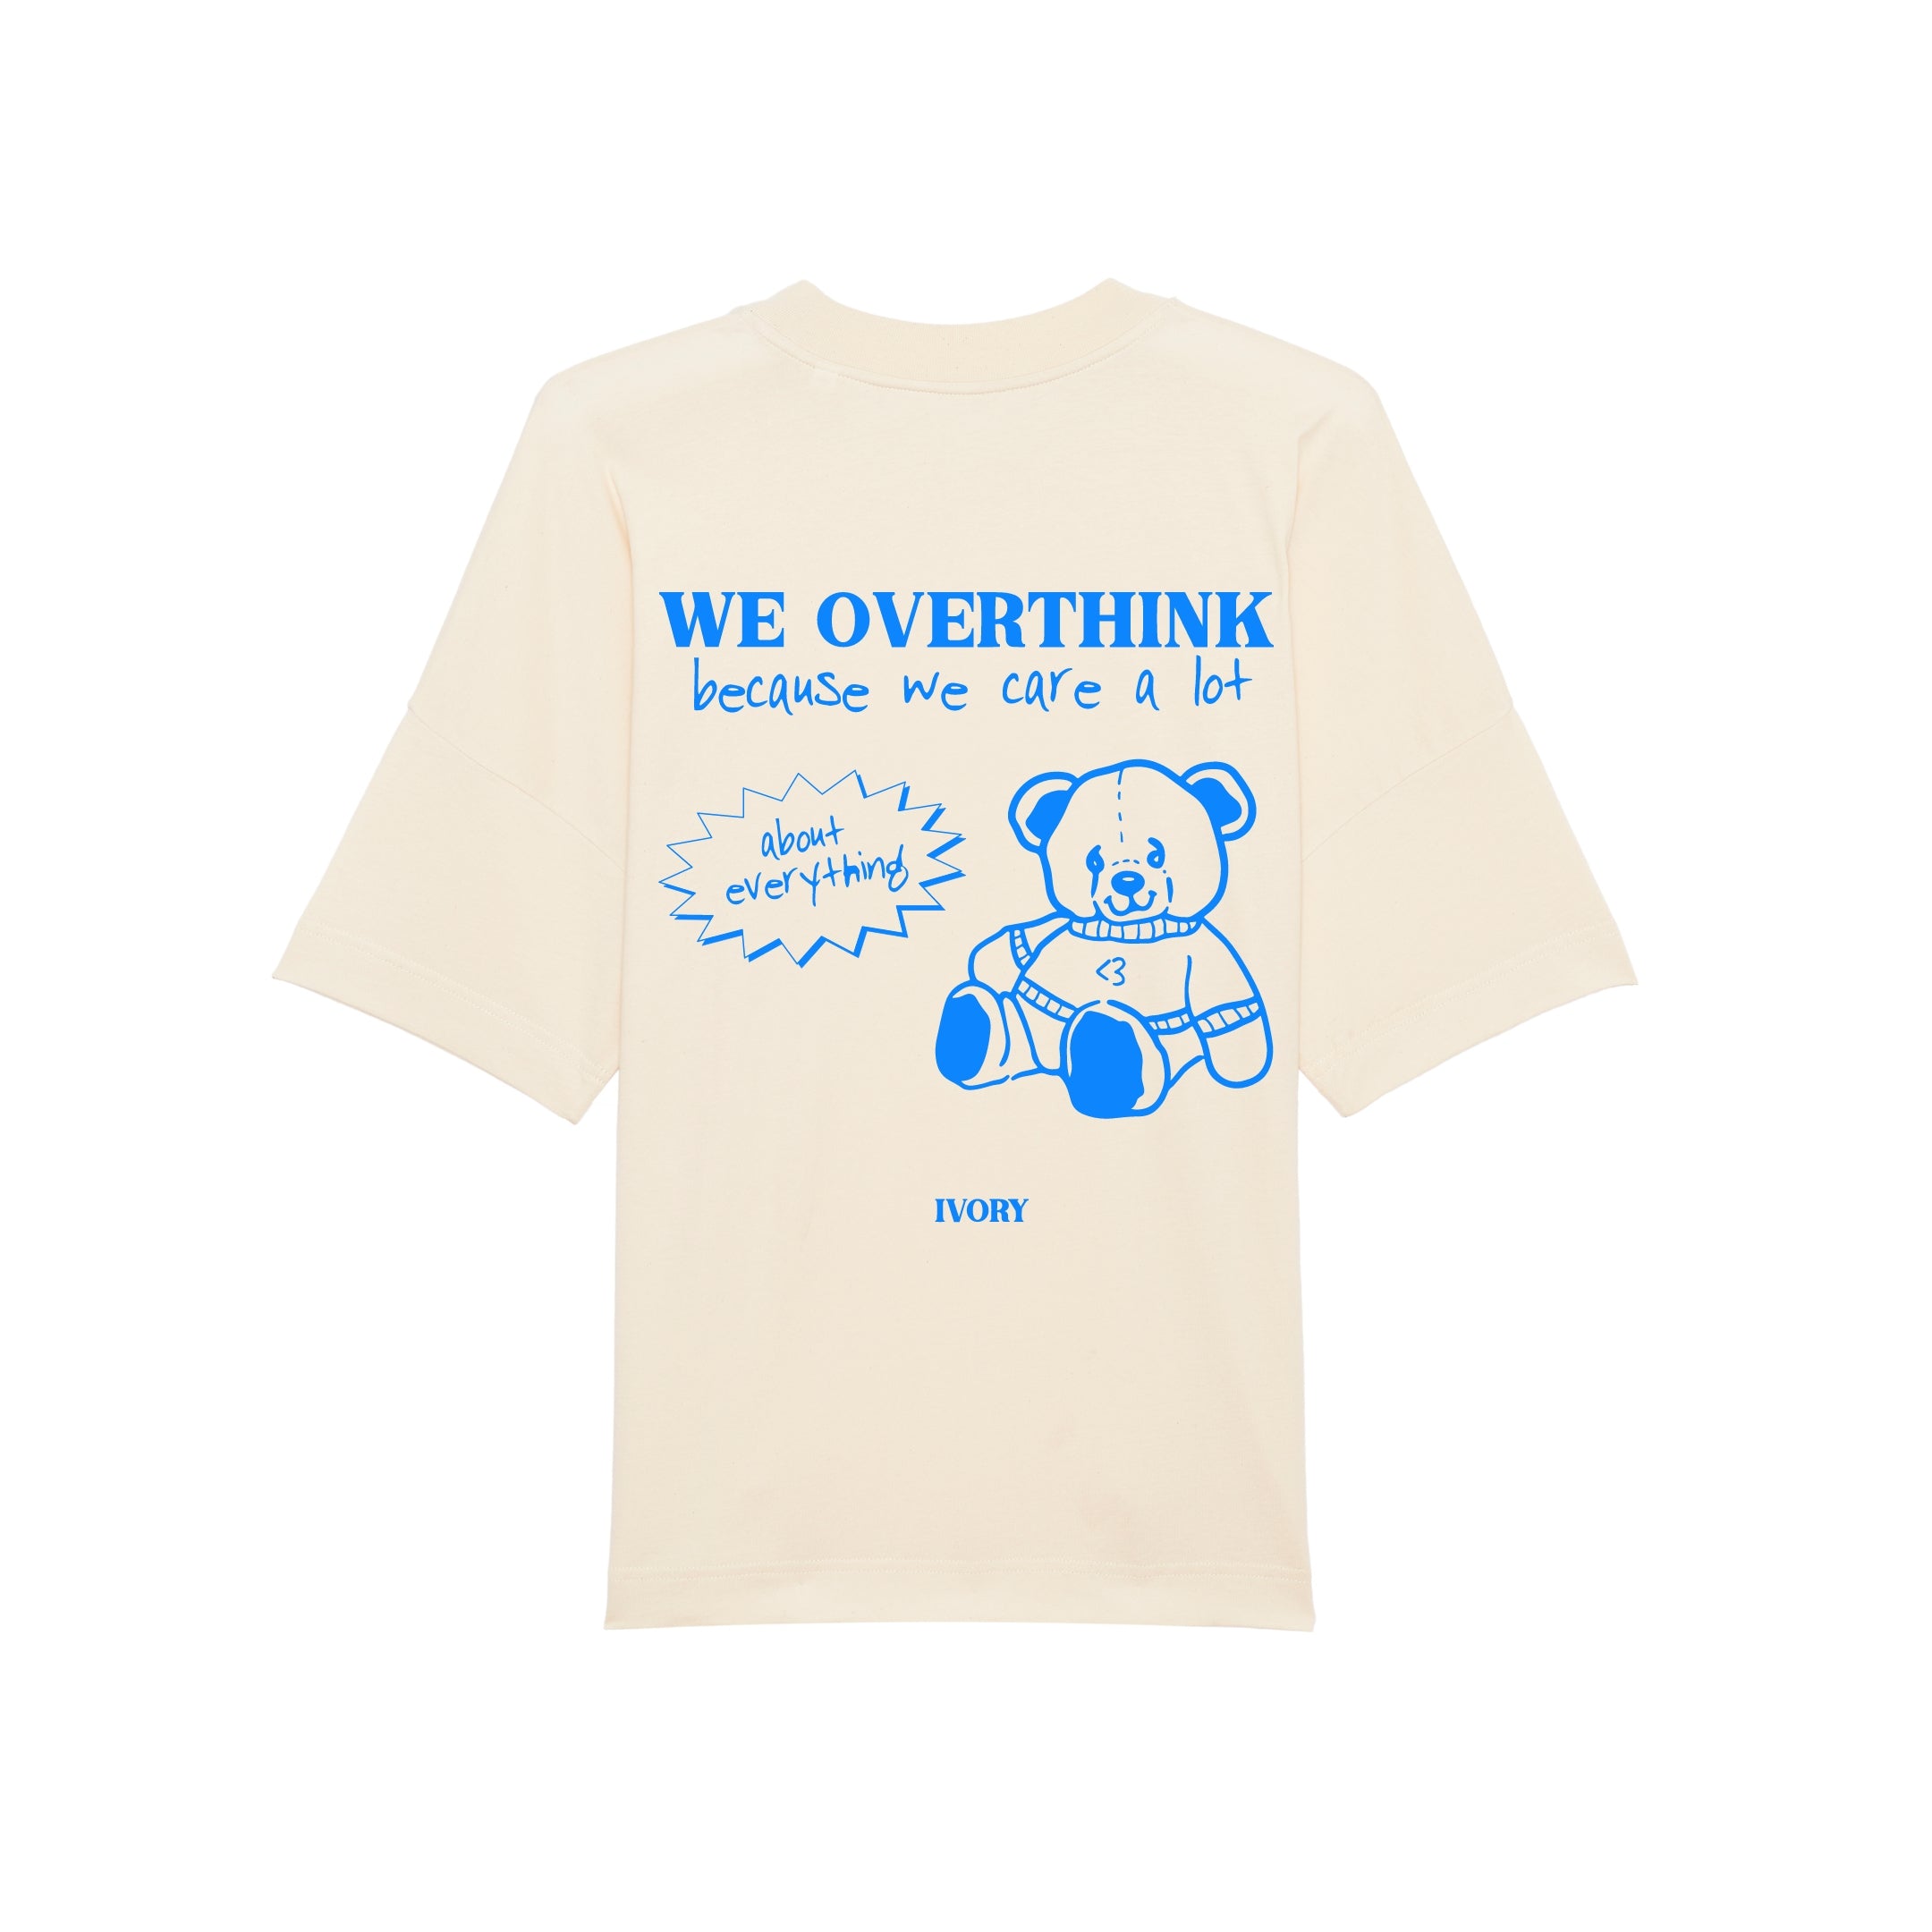 MADE FOR OVERTHINKERS BY OVERTHINKERS OVERSIZED TEE NATURAL RAW